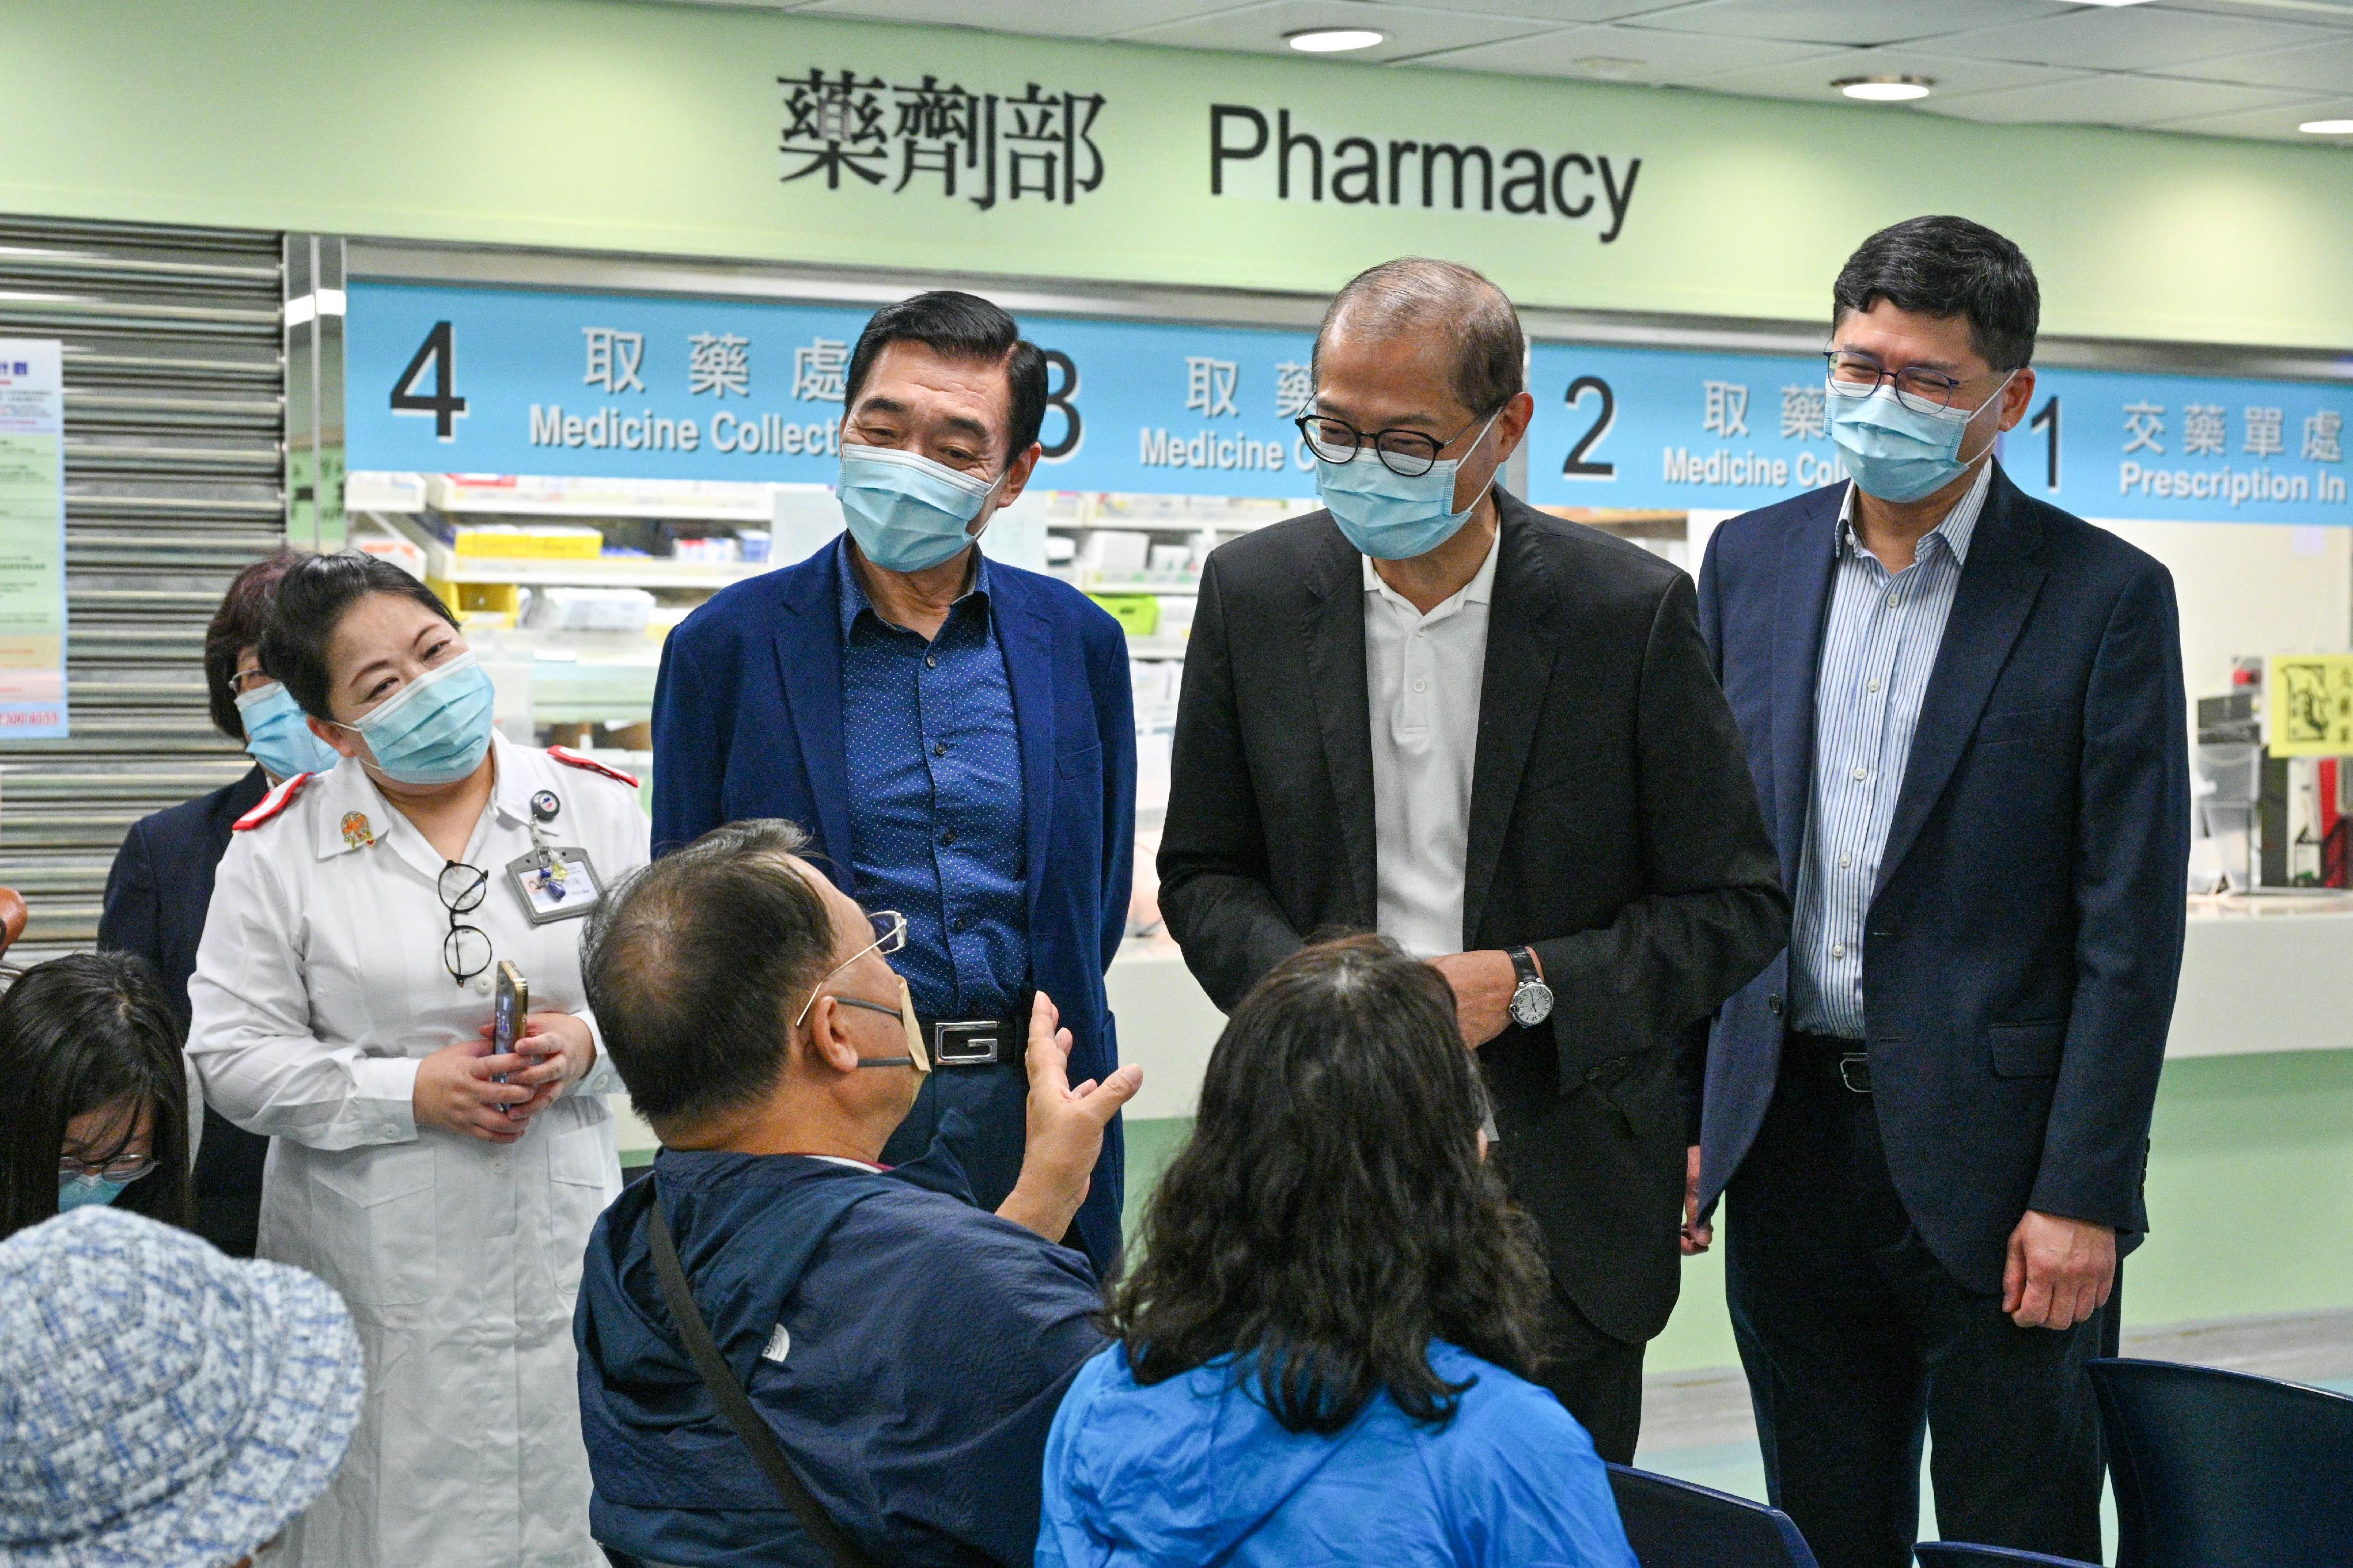 The Secretary for Health, Professor Lo Chung-mau (second right); the Chairman of the Hospital Authority (HA), Mr Henry Fan (second left); and the Chief Executive of the HA, Dr Tony Ko (first right), chat with citizens before receiving the seasonal influenza vaccination at the Sai Wan Ho General Out-patient Clinic today (September 28).
